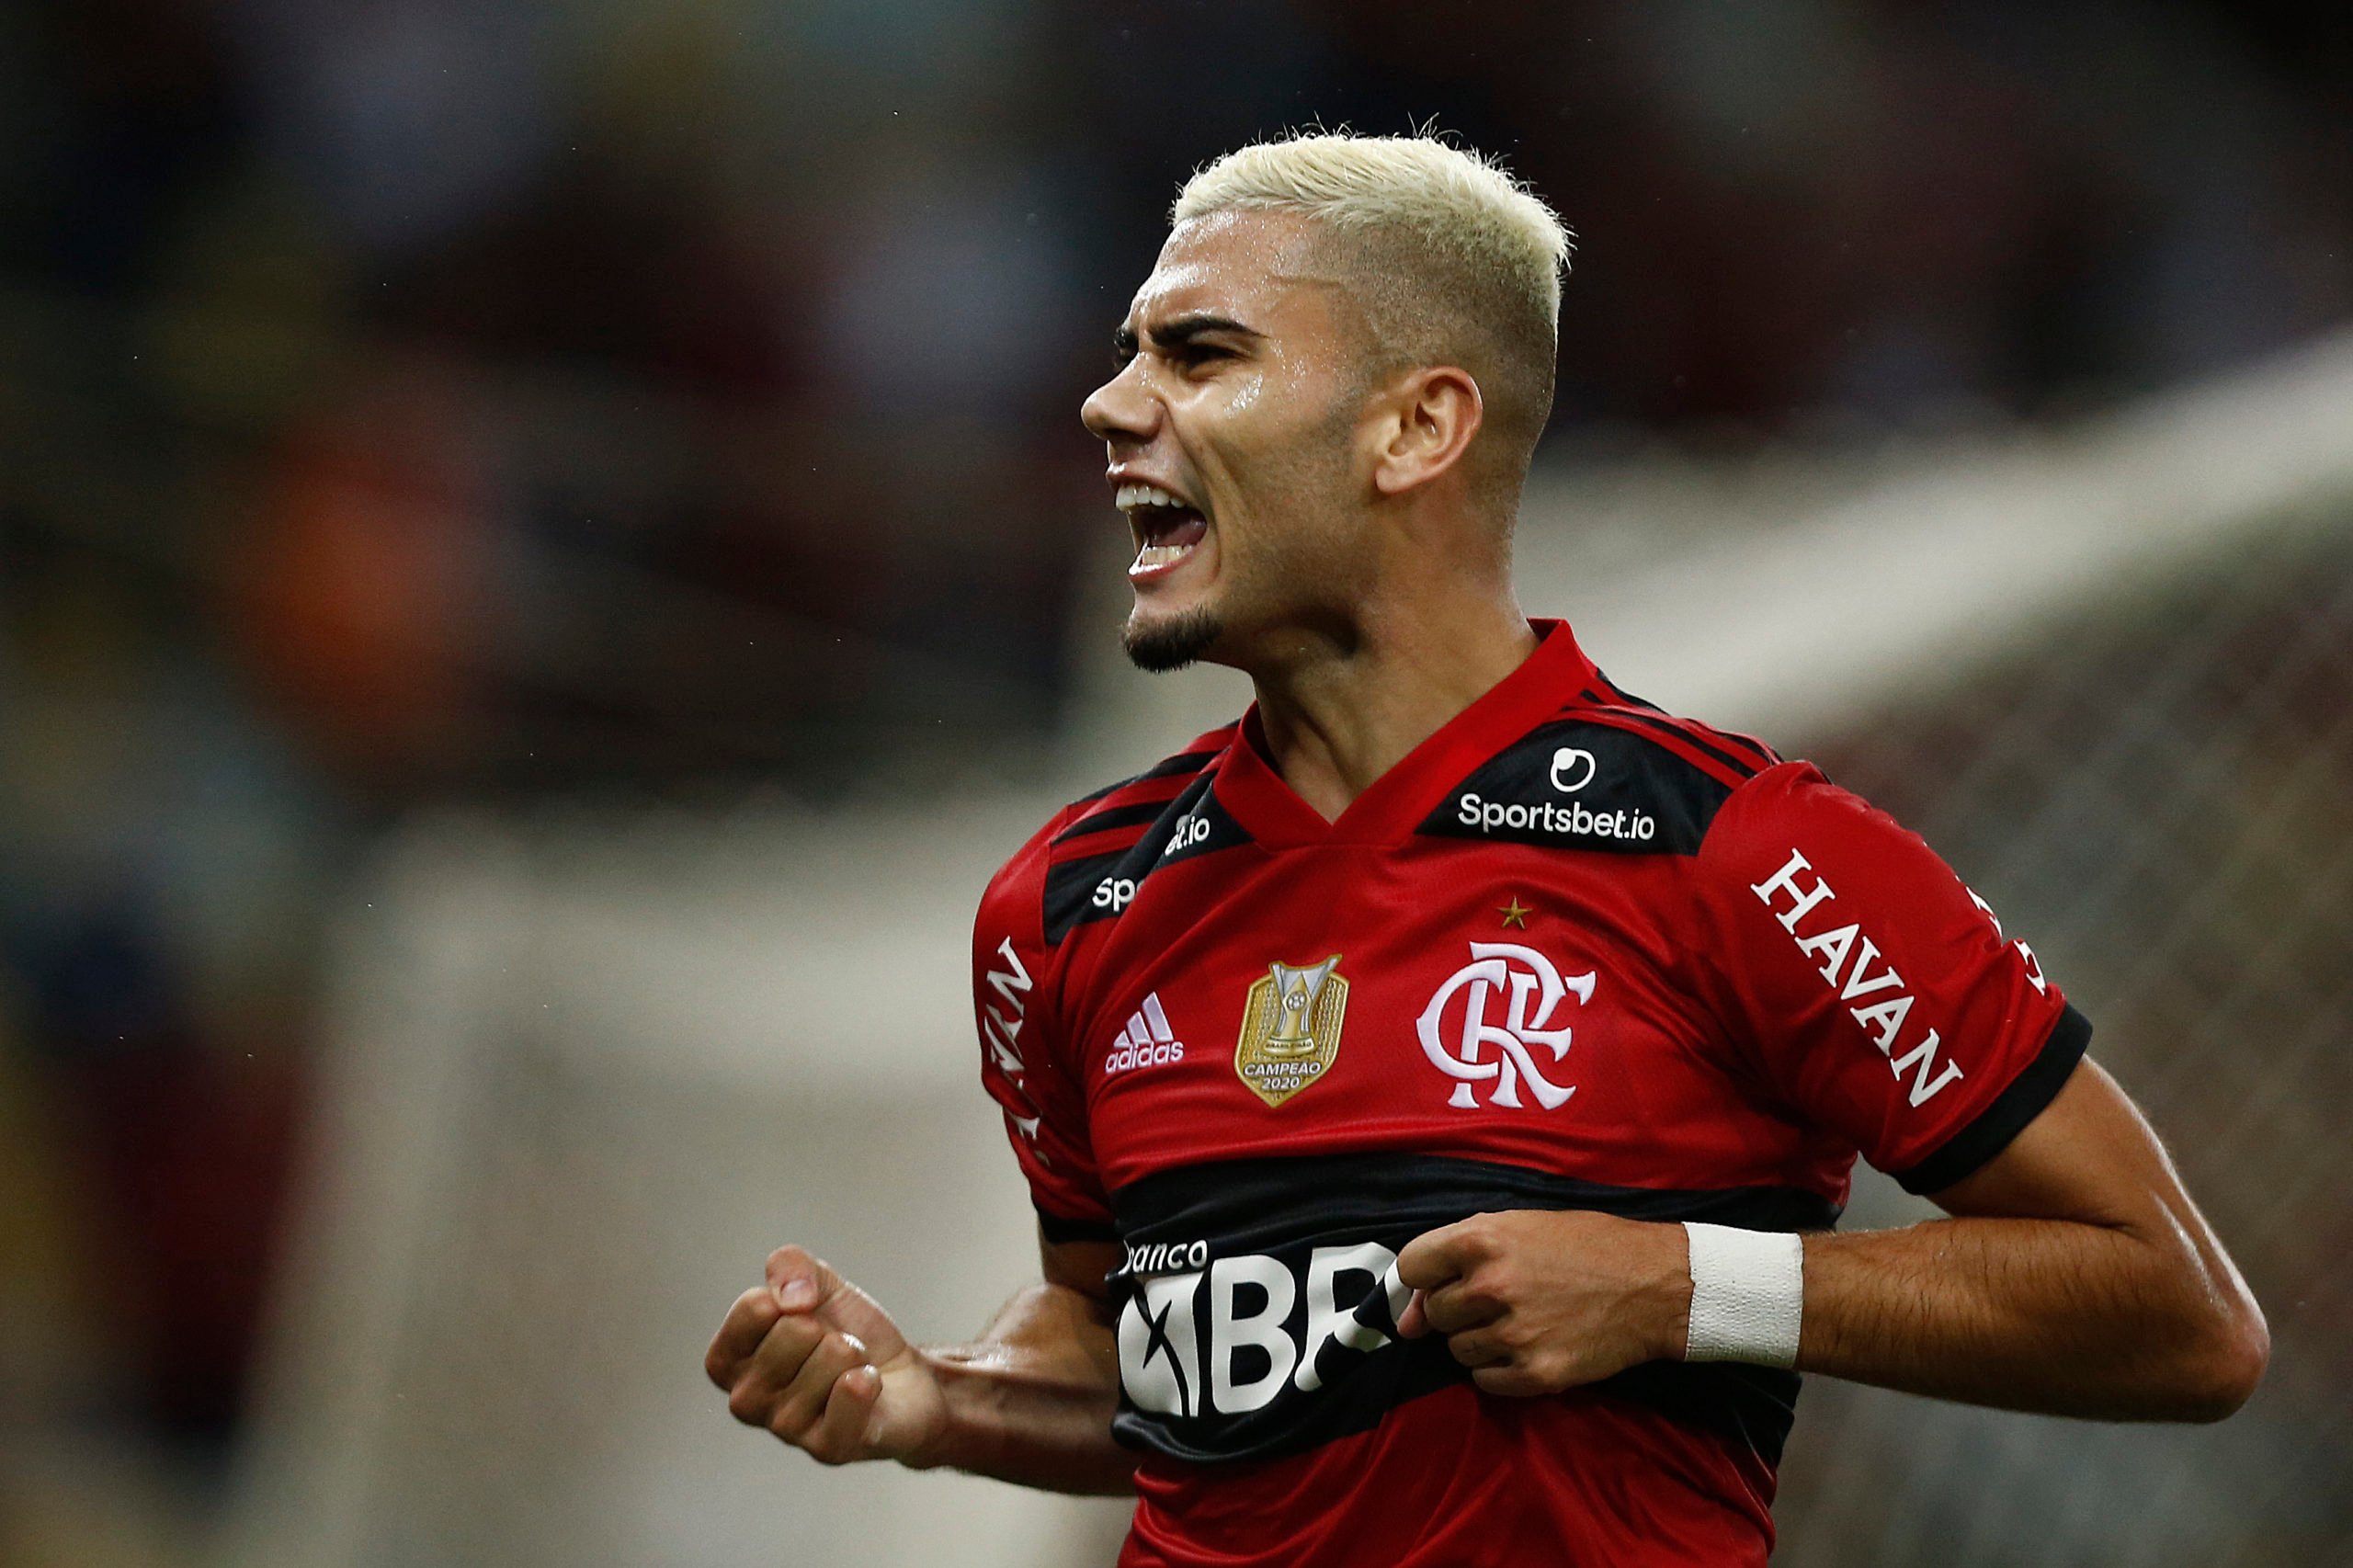 Andreas Pereira frustrated ahead of final Flamengo match amid Fulham links